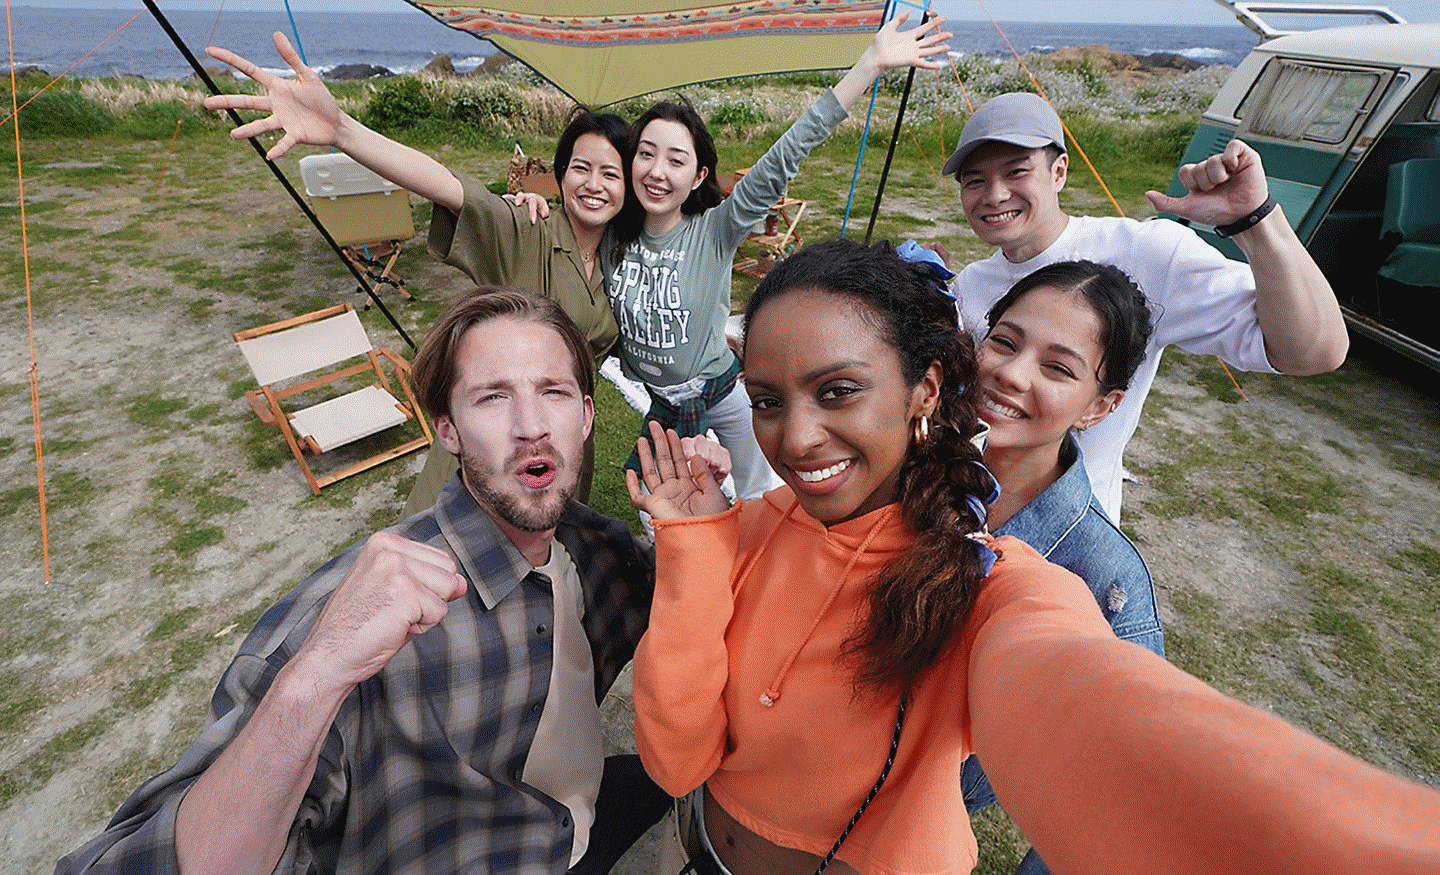 Image showing that multiple people can fit in the frame, even when shooting a selfie